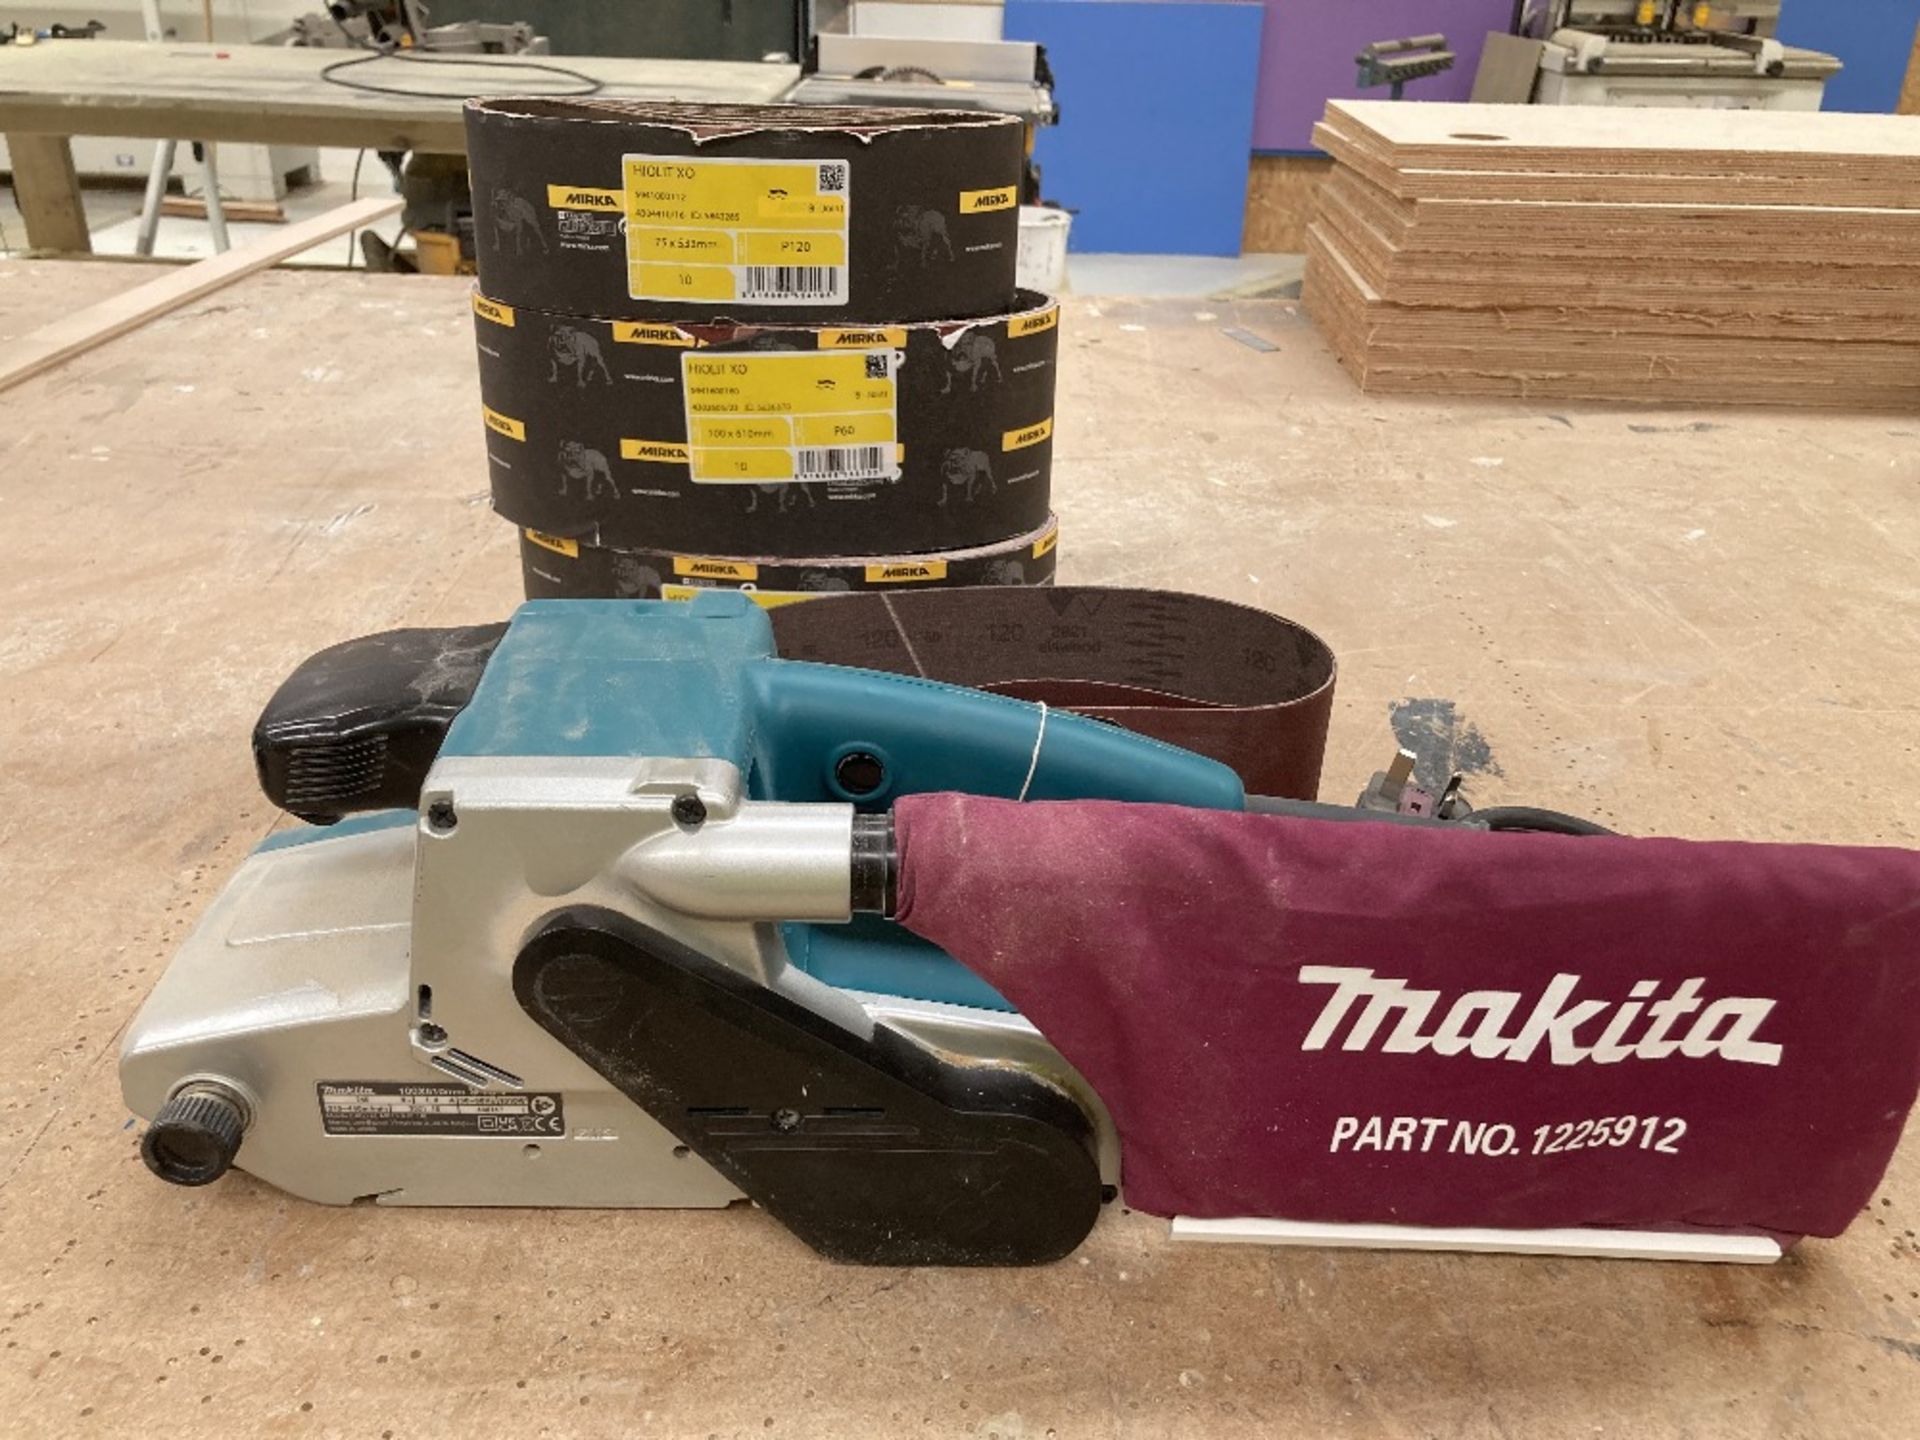 Makita 100x610mm 240v Planer Complete with Spare Sanding Belts - Image 9 of 9